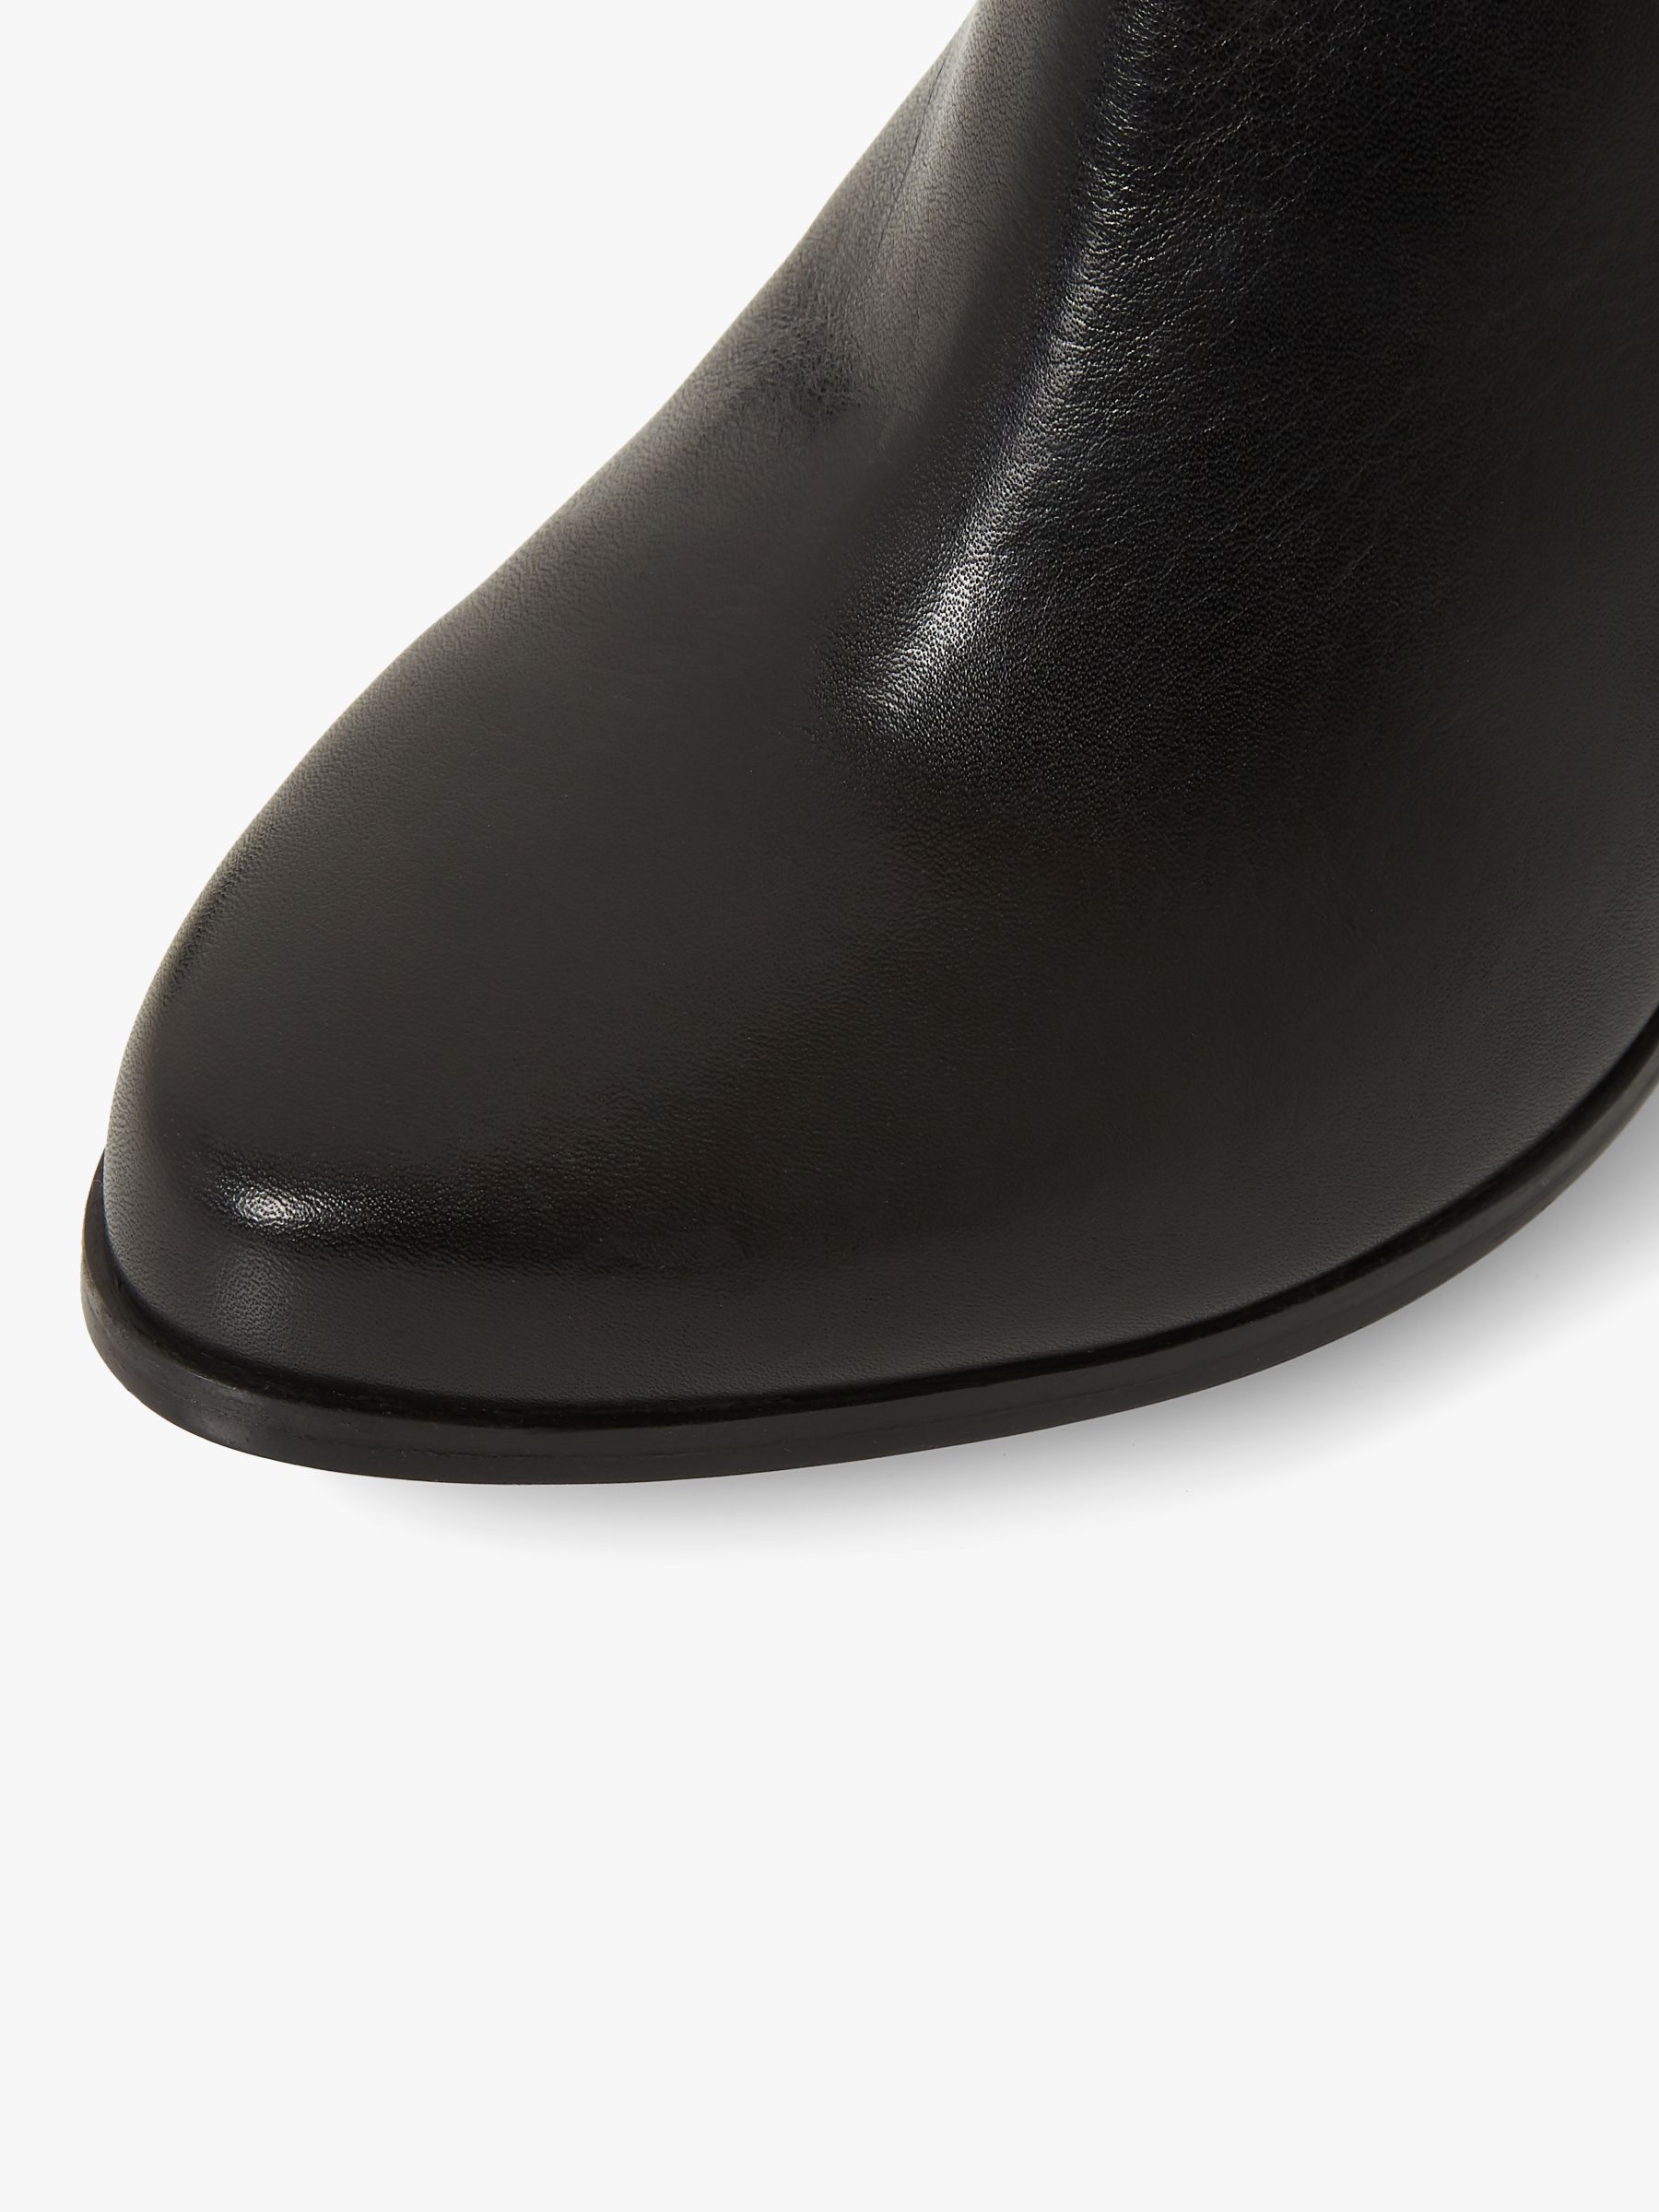 Dune Oleria Mixed Ankle Boots, Black at John Lewis & Partners